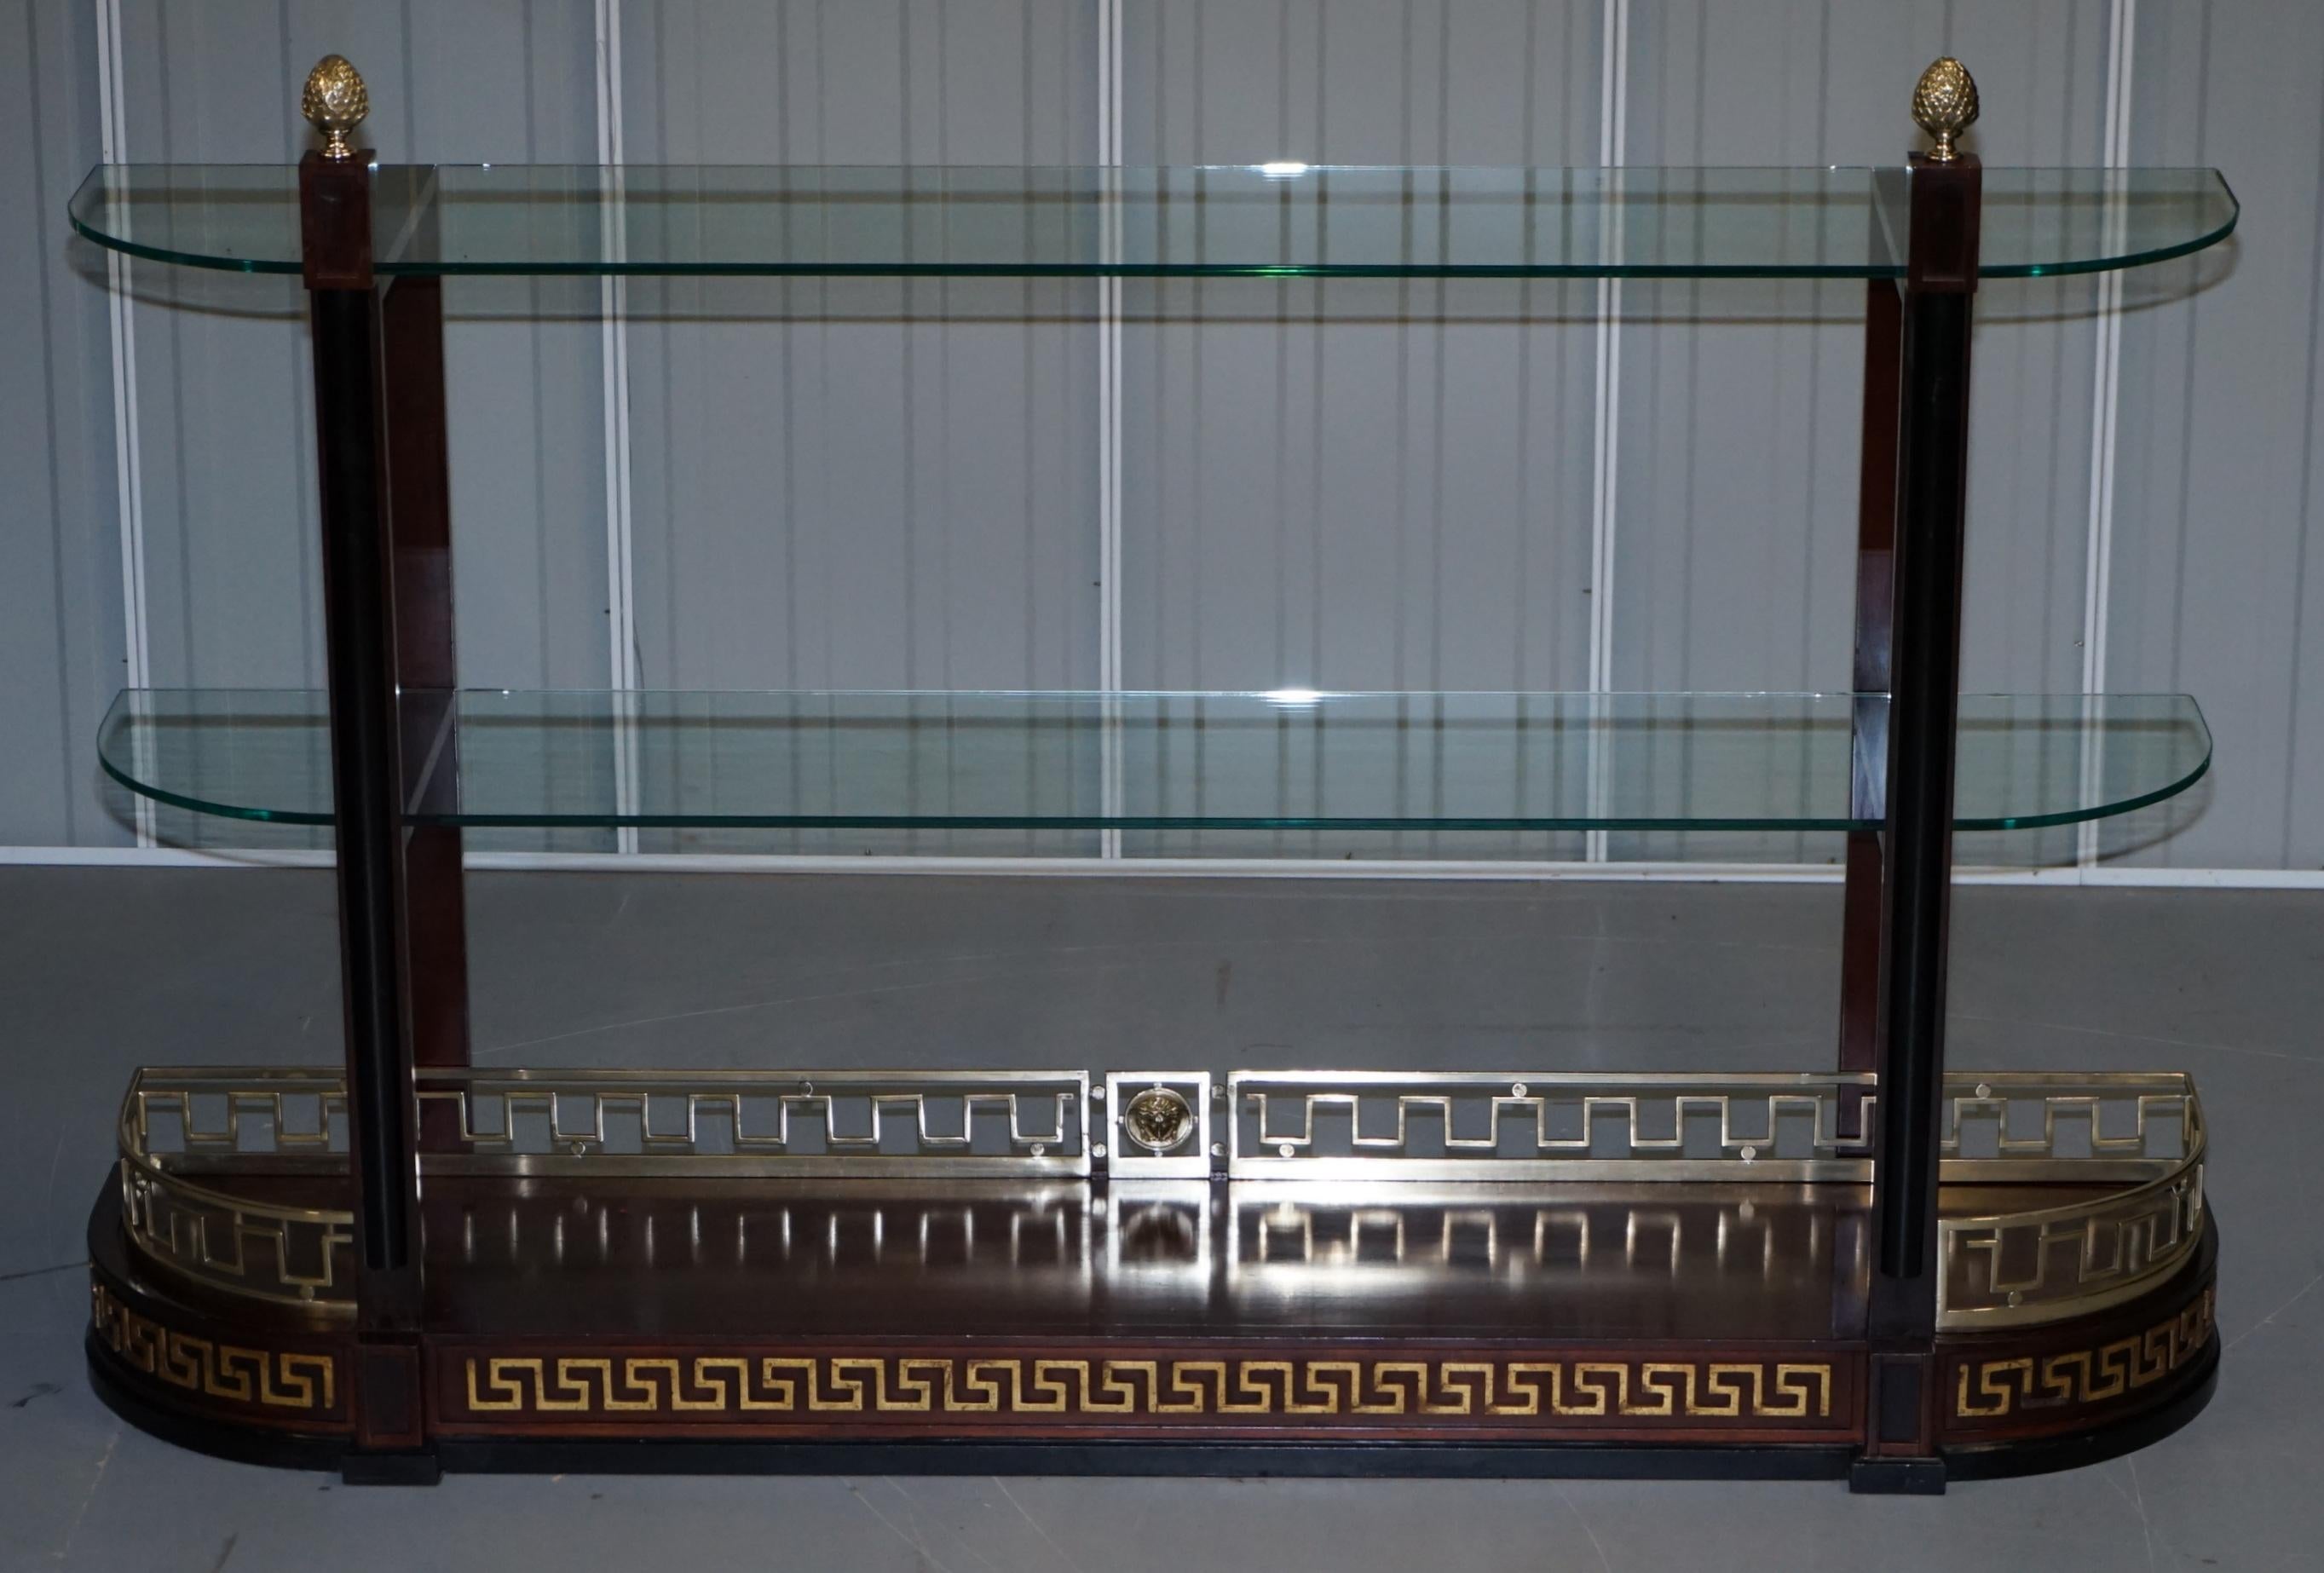 We are delighted to offer for sale this truly stunning custom made to order Versace mahogany and brass console bookcase

A very high end commission, this was ordered around 12 years ago by the then richest lady in England, apparently it cost